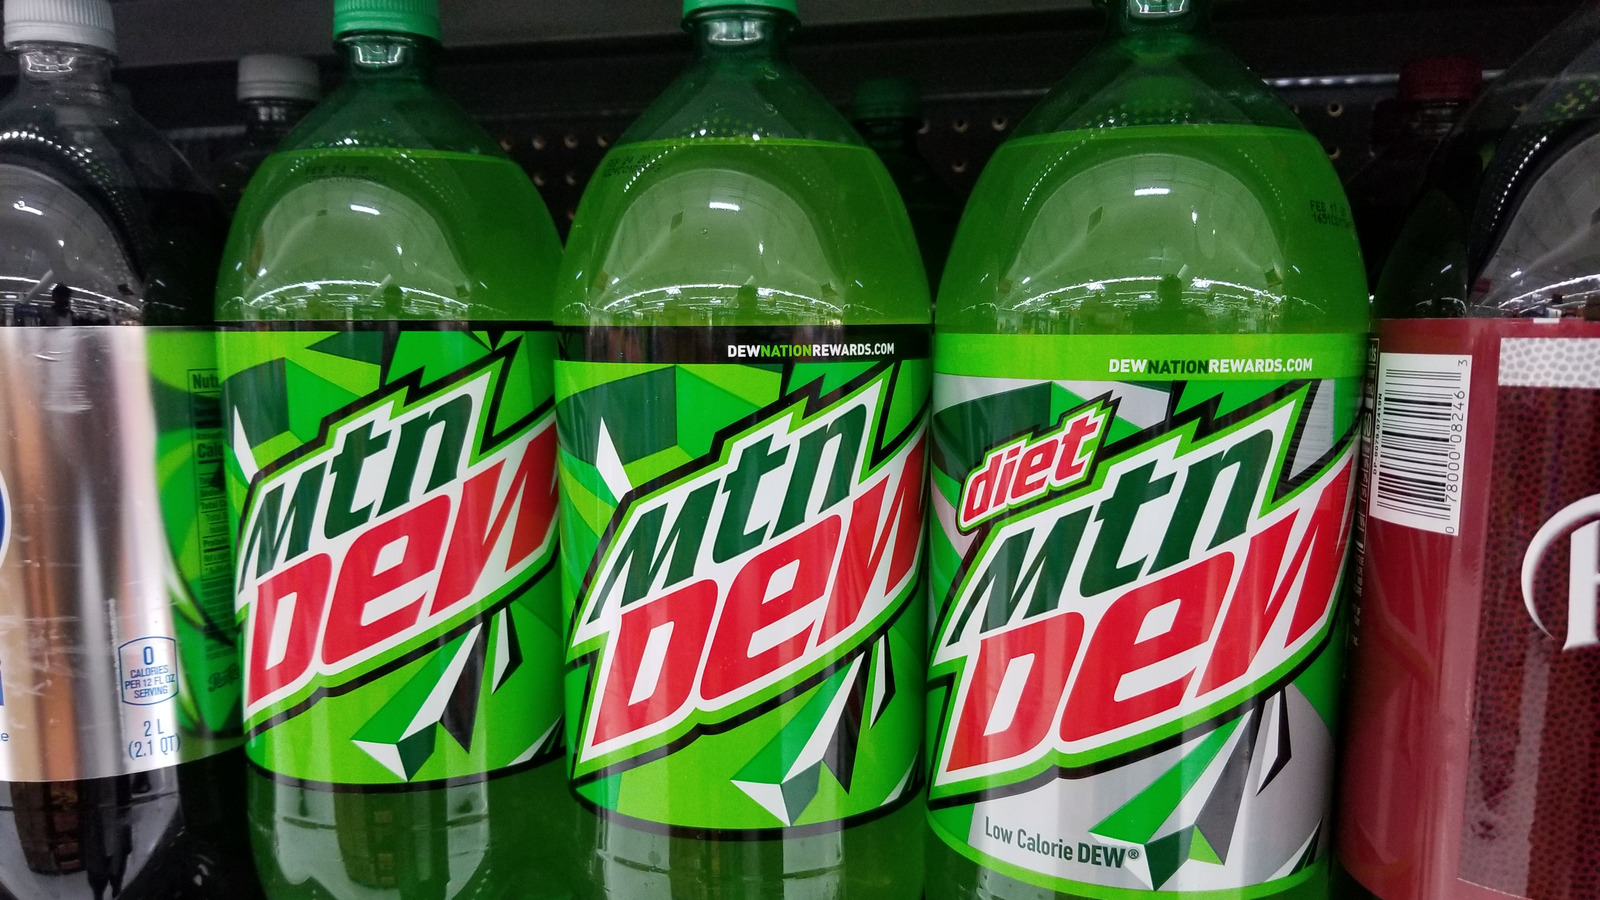 https://www.thedailymeal.com/img/gallery/does-mountain-dew-even-have-a-flavor/l-intro-1682516150.jpg